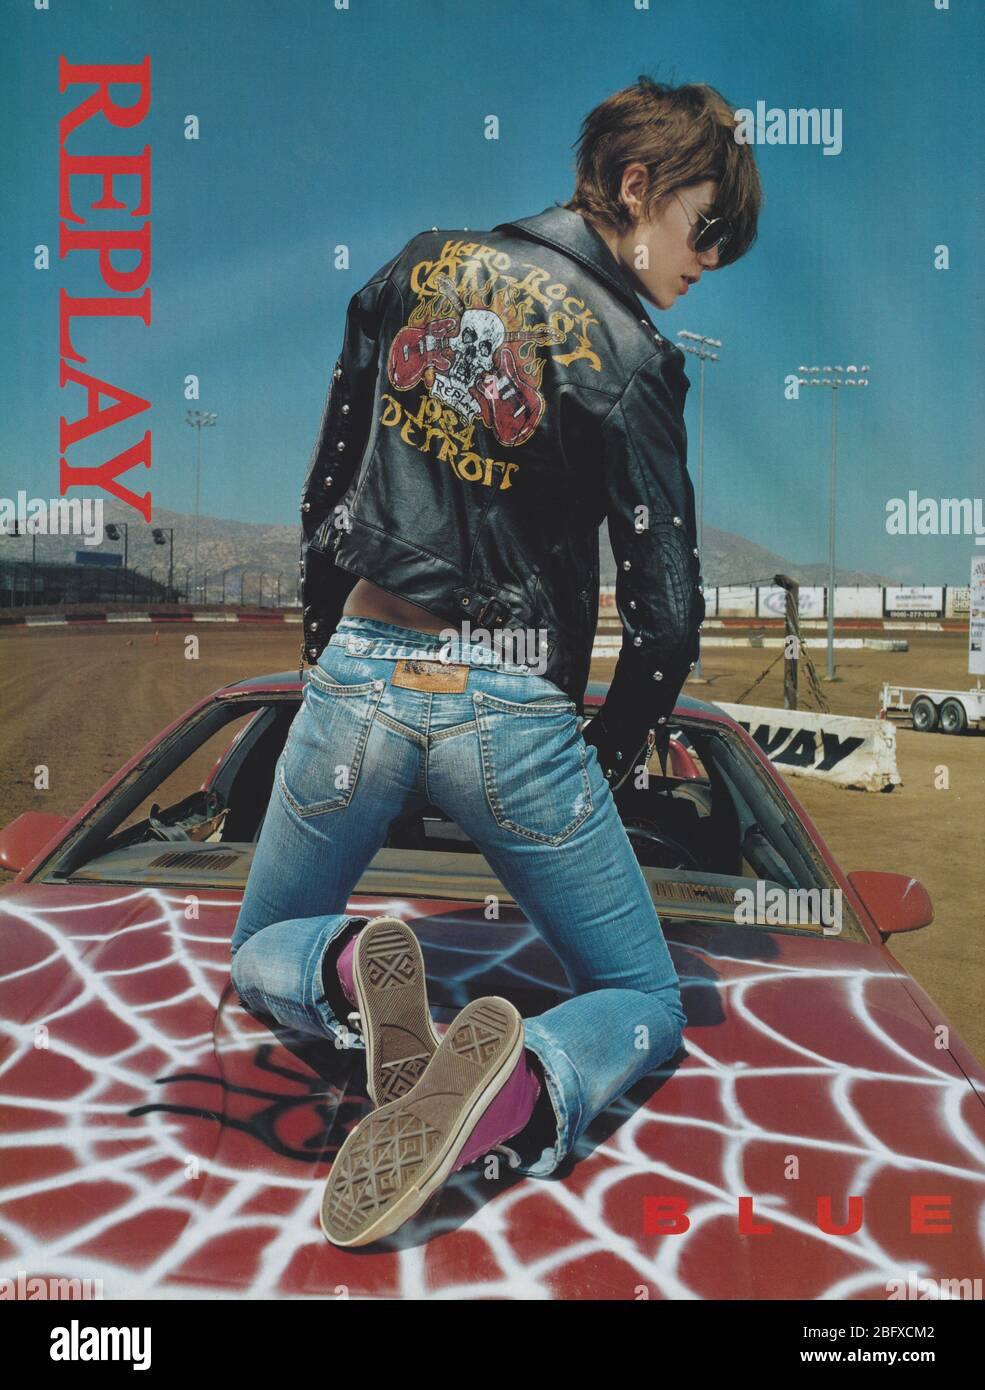 poster advertising Replay denim, casual wear jeans brand in magazine from  2004, advertisement, creative Replay 2000s advert Stock Photo - Alamy